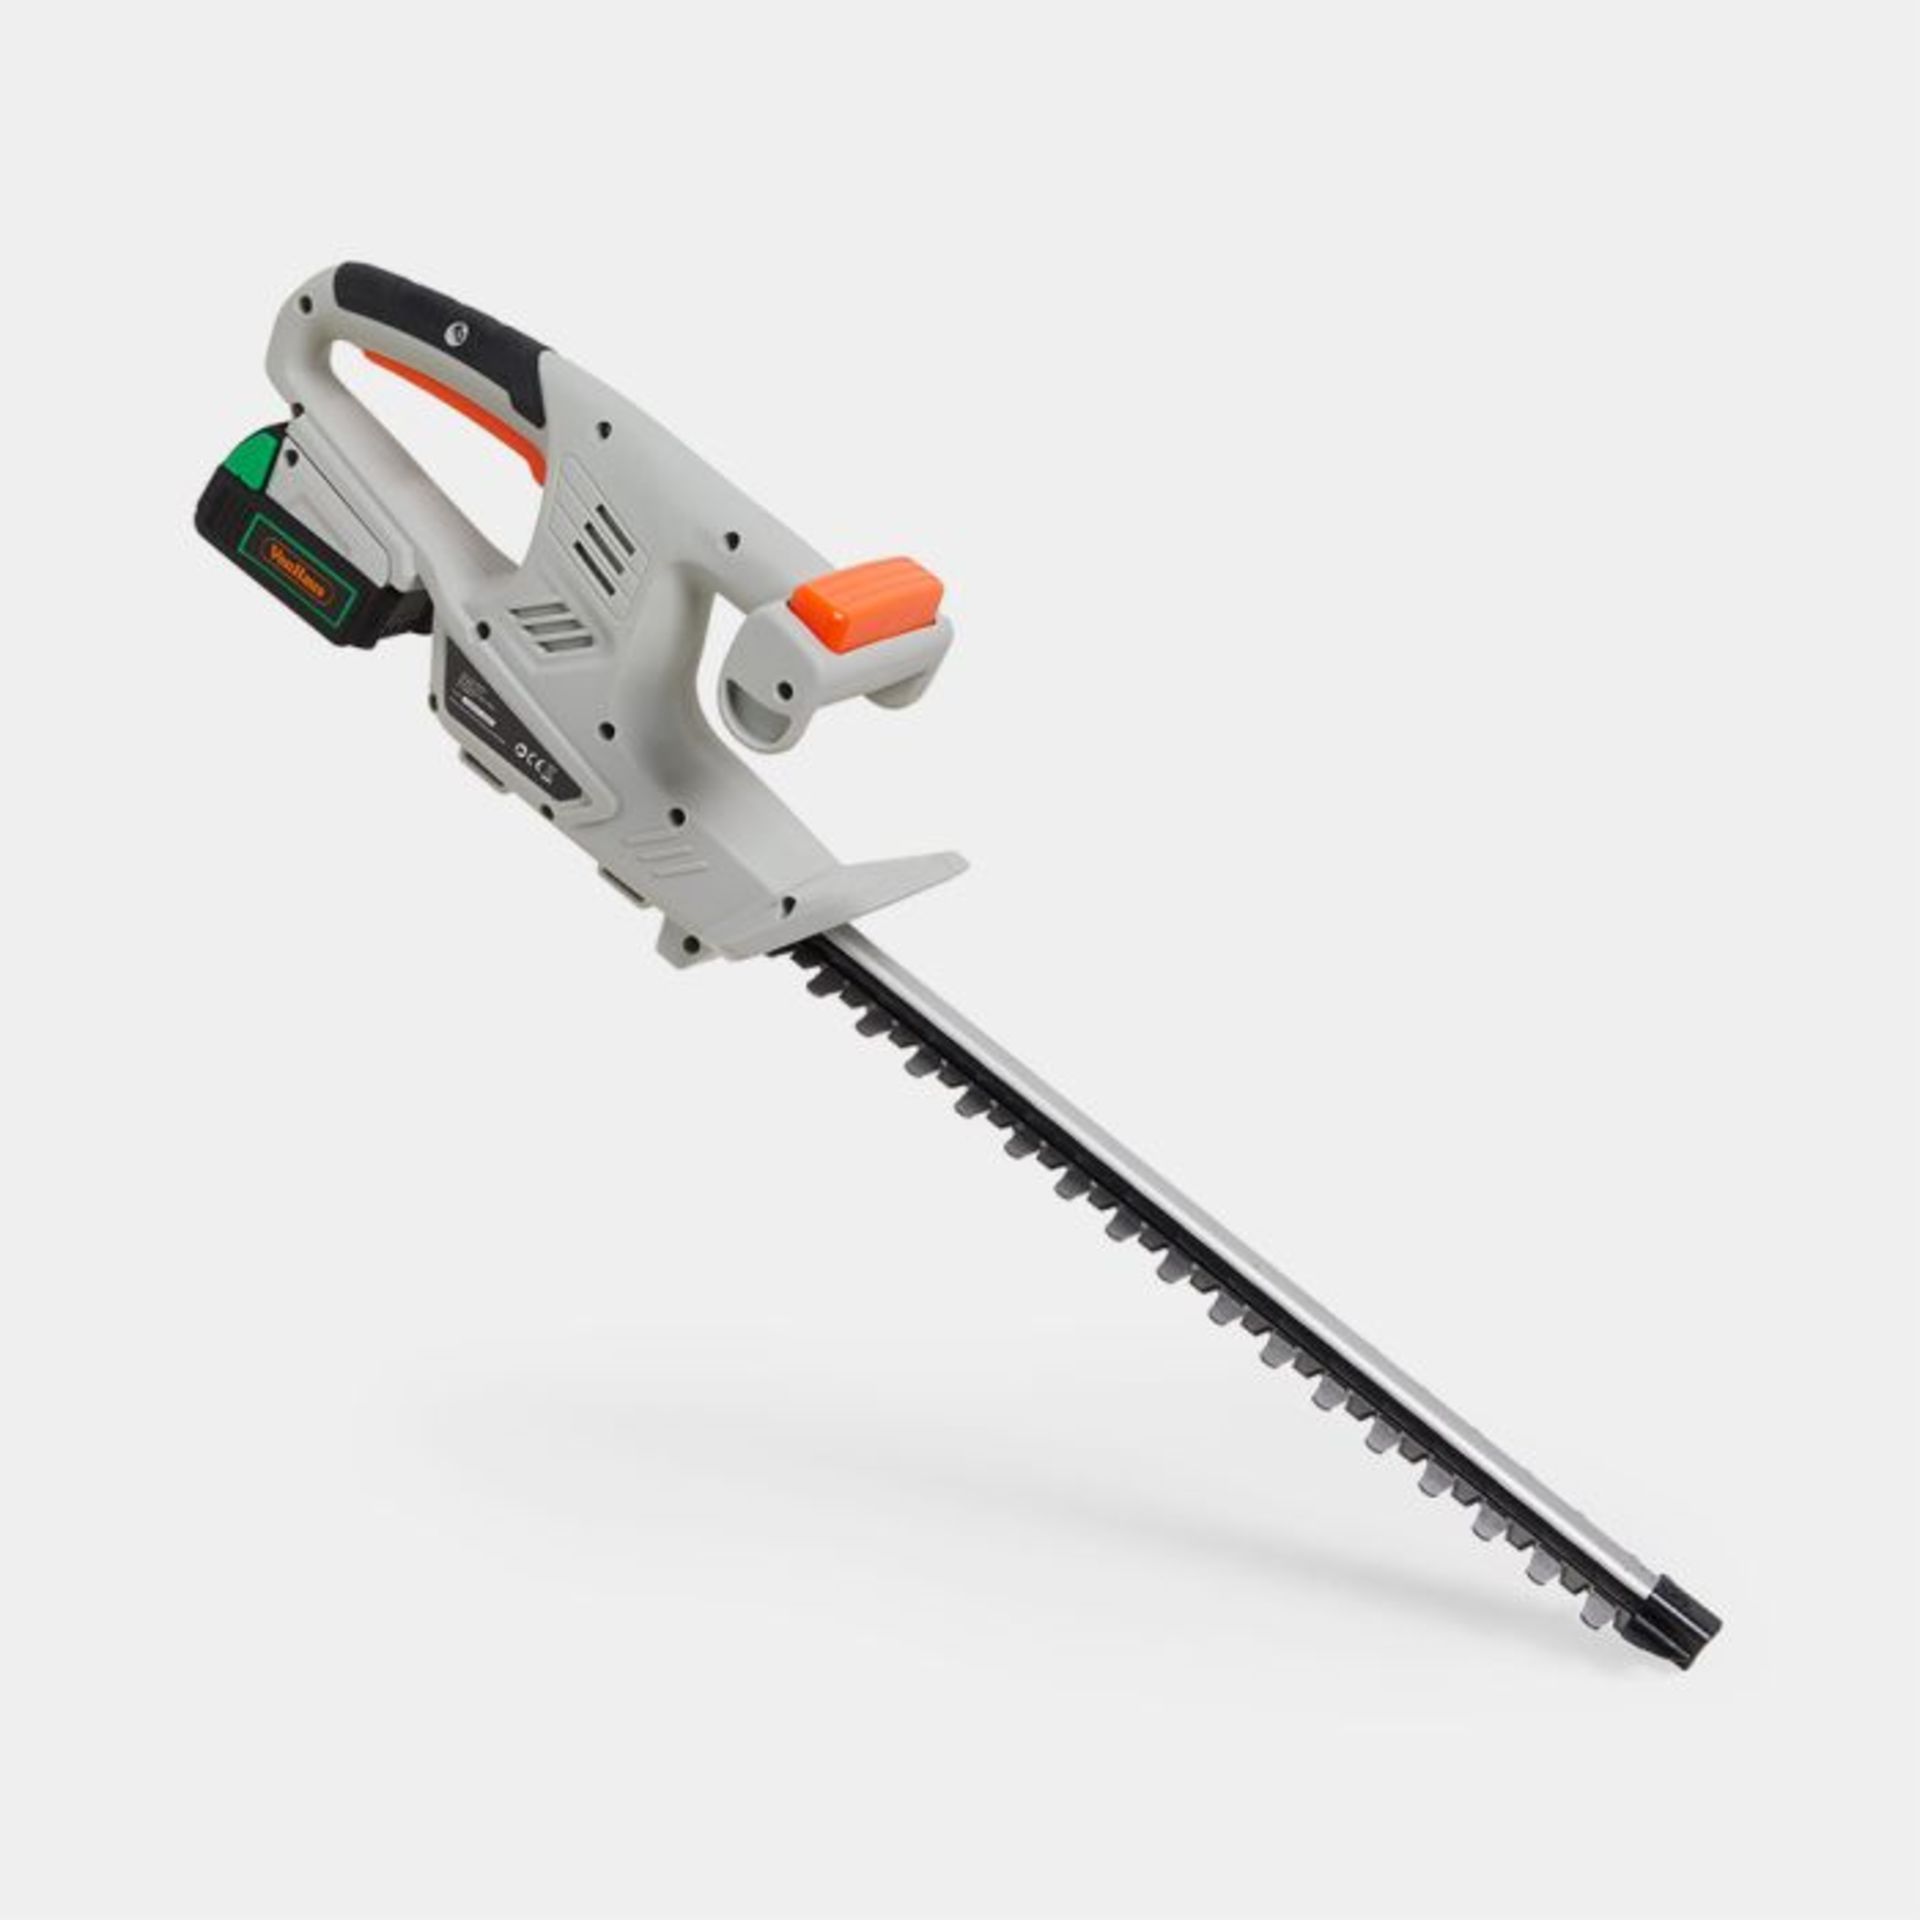 F-Series Cordless Hedge Trimmer. - ER36. For those with smaller gardens, our 12V Max Hedge Trimmer